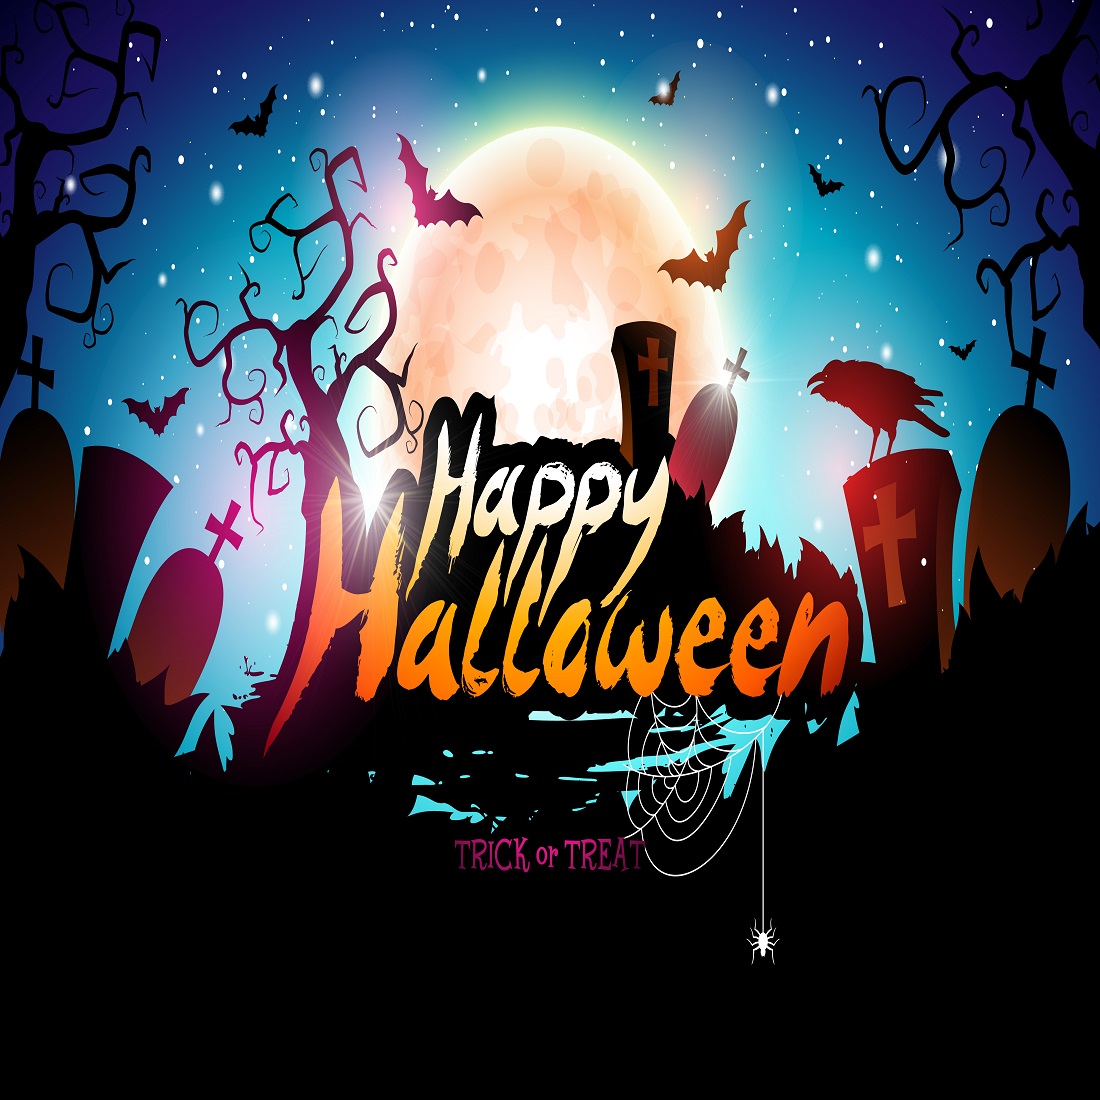 Happy Halloween illustration with crow flying bats night cemetery background preview image.